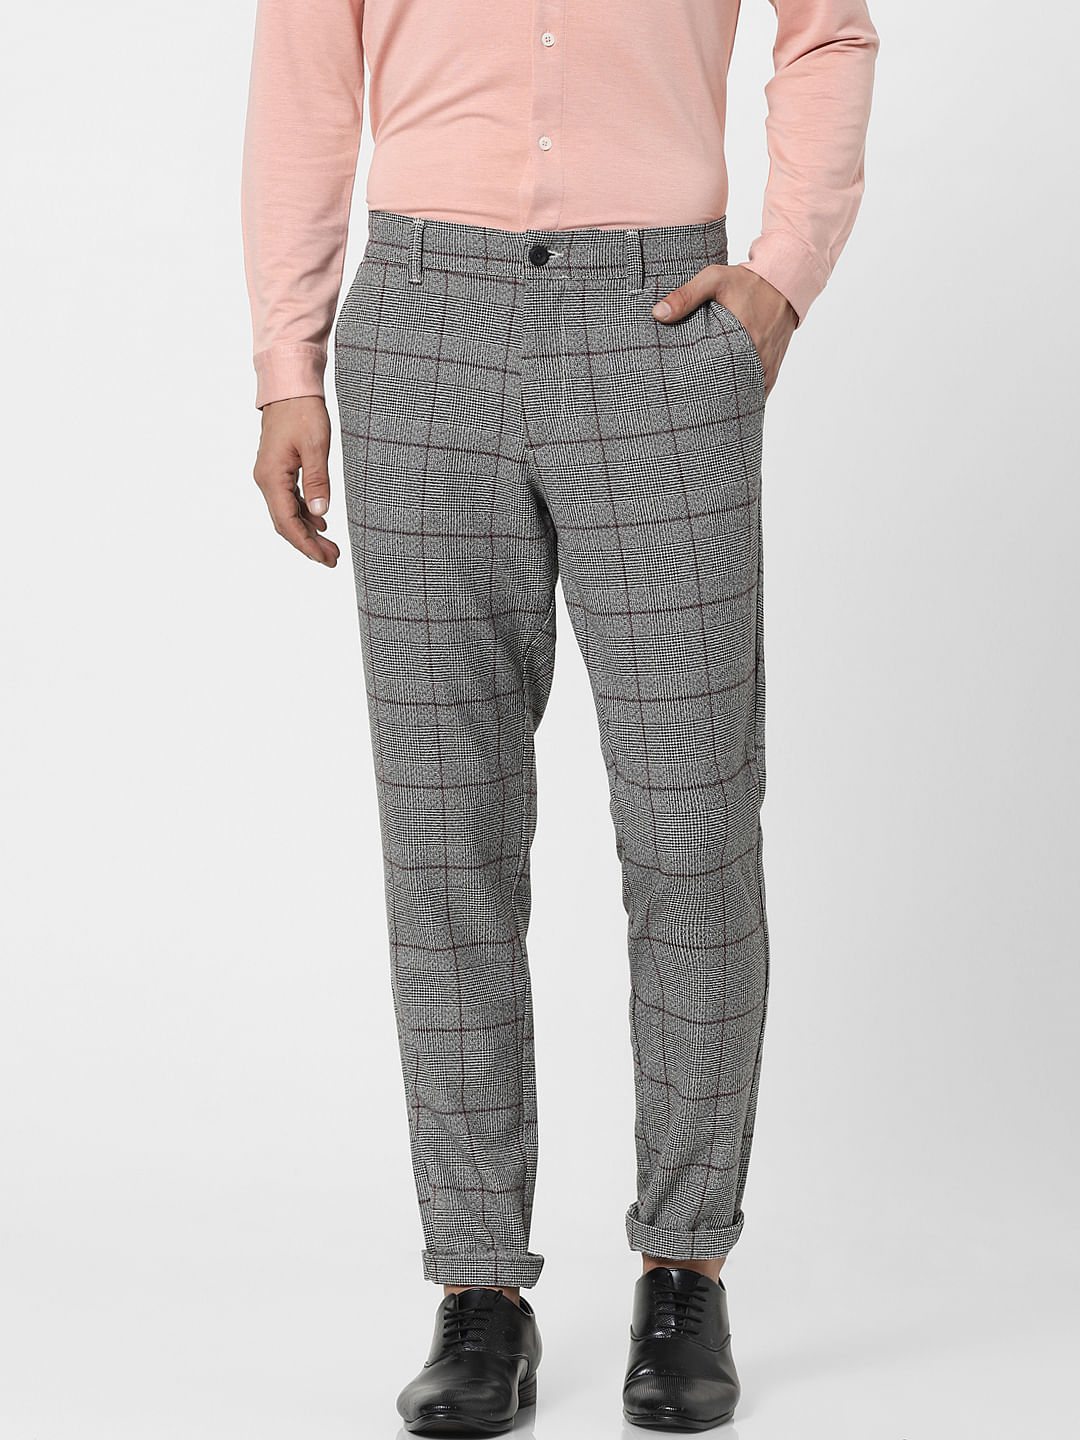 Mens Grey Slim Fit Checkered Casual Chinos Pants with Stretch  Urbano  Fashion